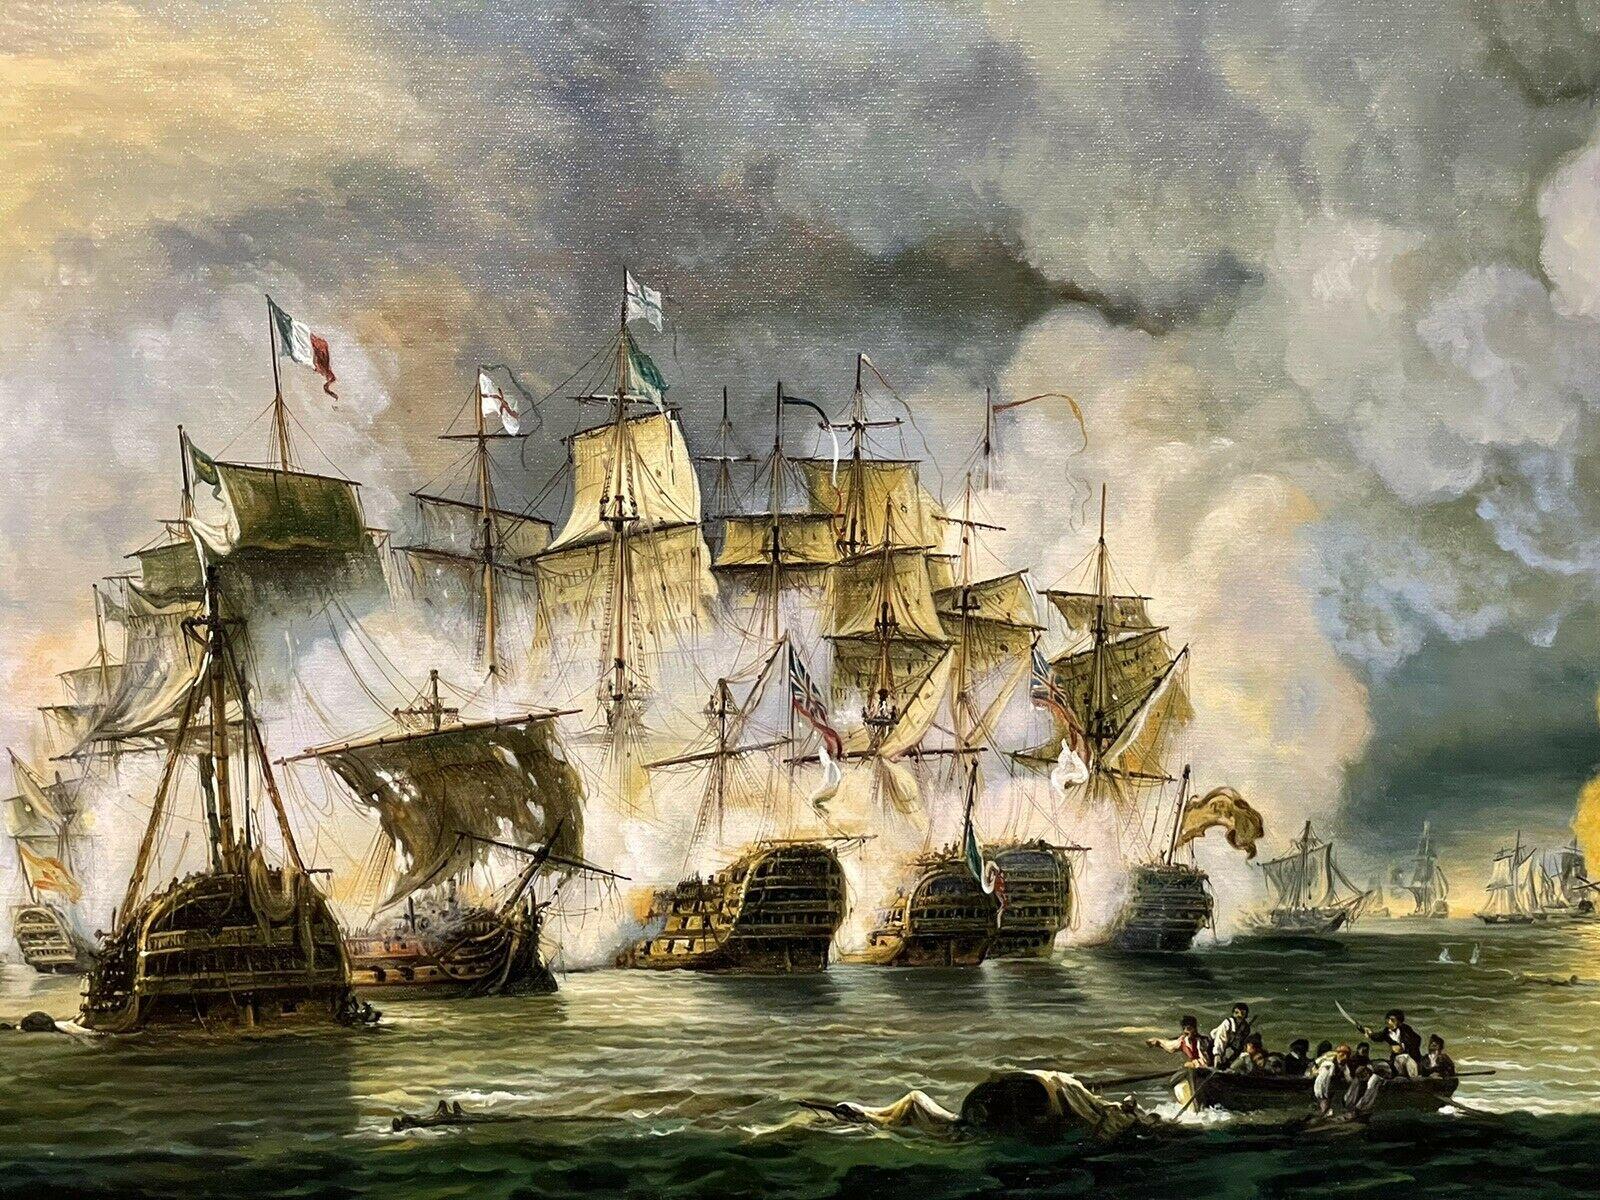 Artist/ School: Edgar S. Nucum (Australian, 20th century), signed lower corner.

Title: The Naval Engagement. The work depicts a historical battle scene from the Napoleonic Wars period - most likely the famous Battle of Trafalgar, October 21st,